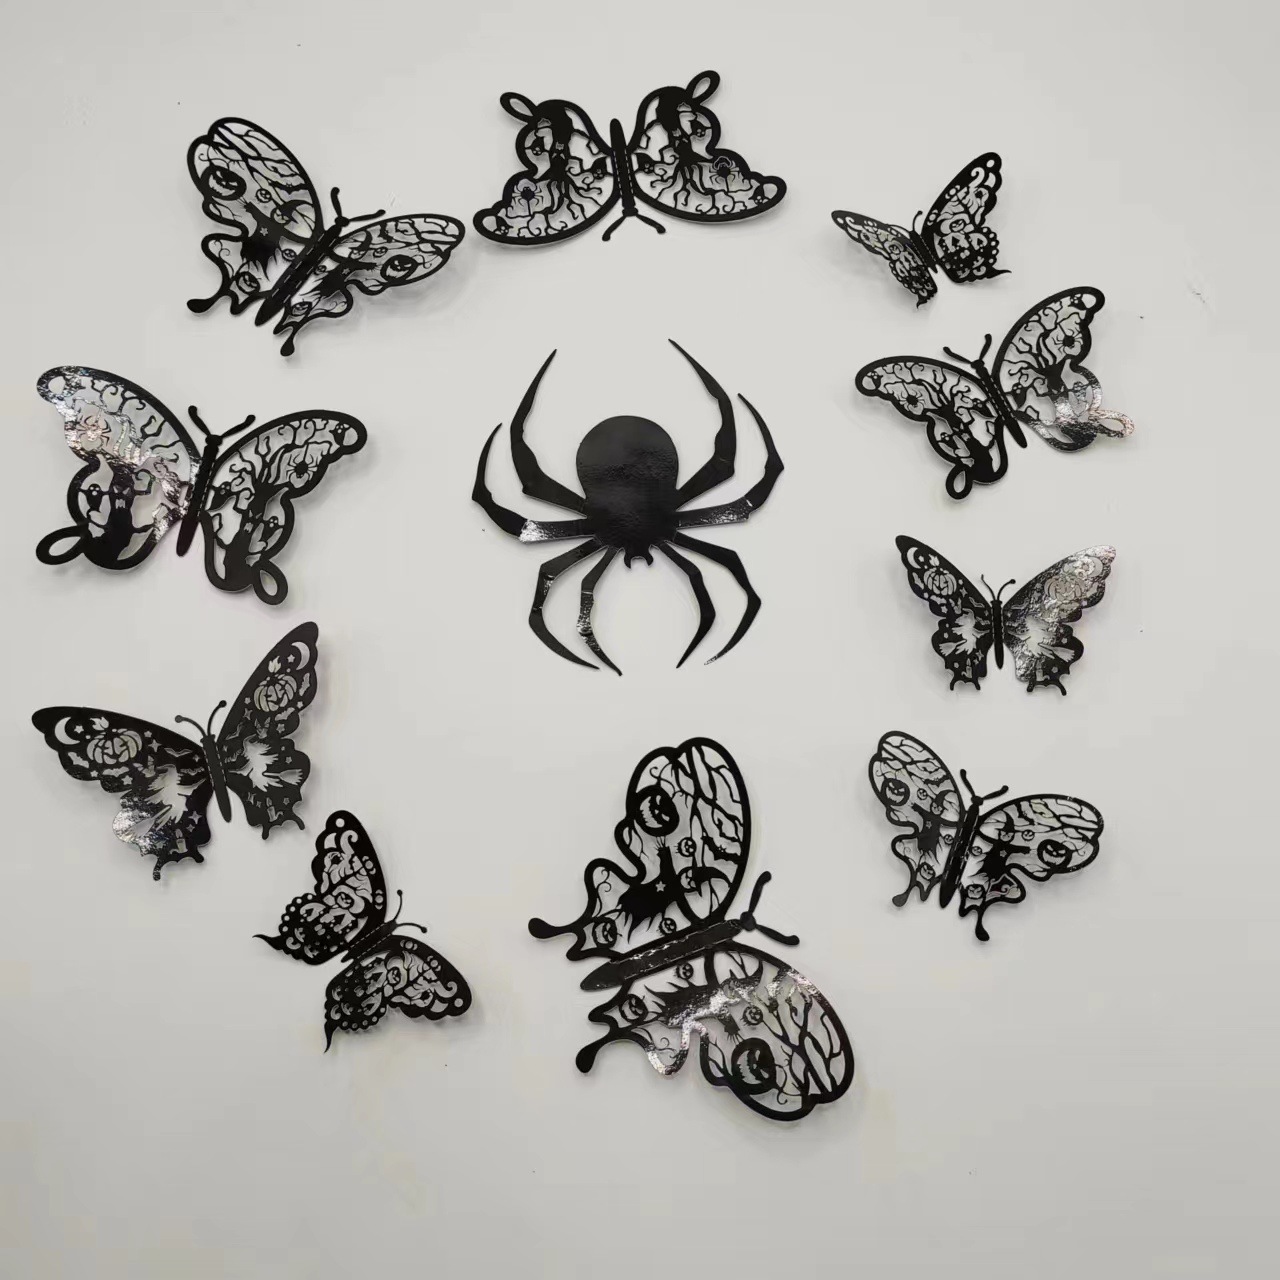 Halloween Series Cross-Border 3D Hollow Butterfly Wall Sticker Decoration Amazon Atmosphere Layout Three-Dimensional Butterfly Stickers